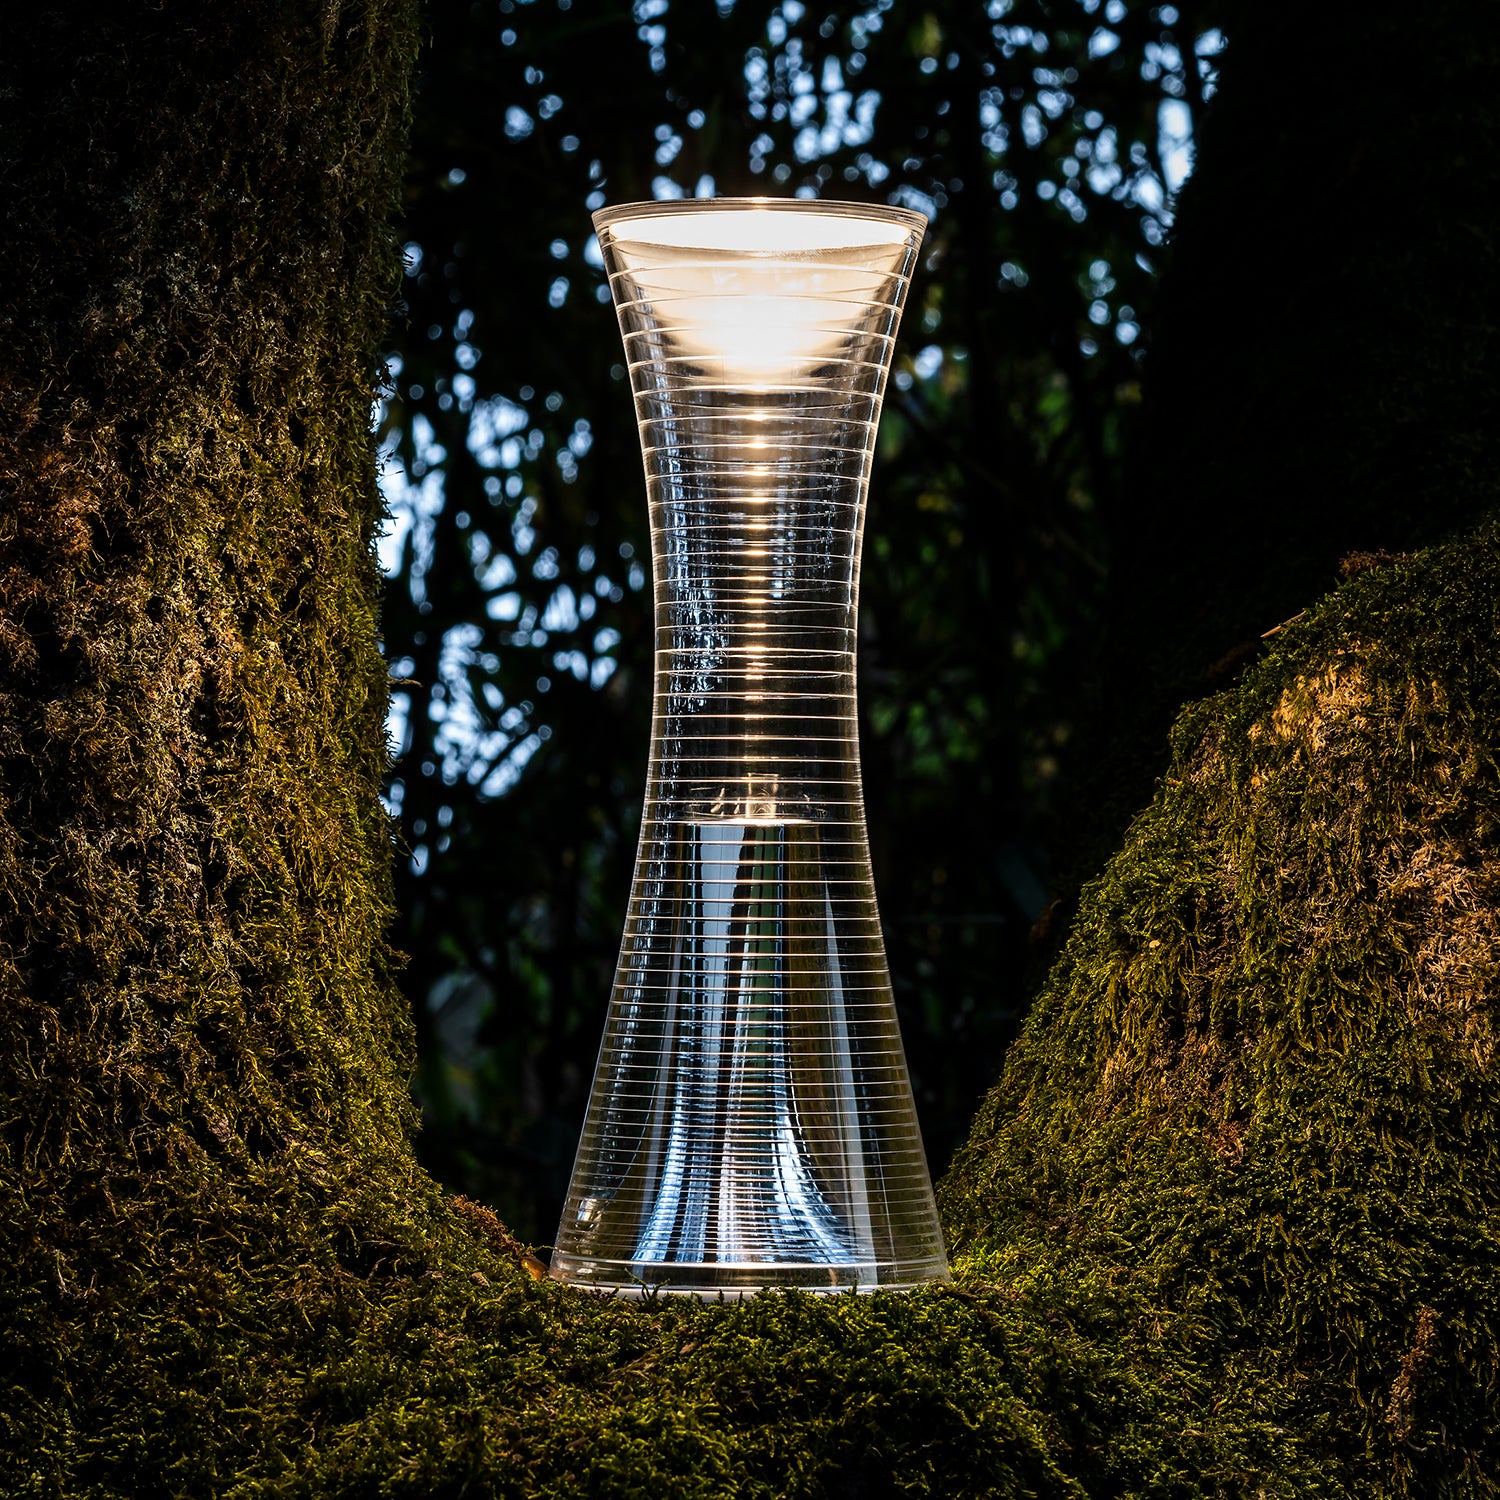 Artemide Come Together Portable Lamp Ambience image showing lamp on moss